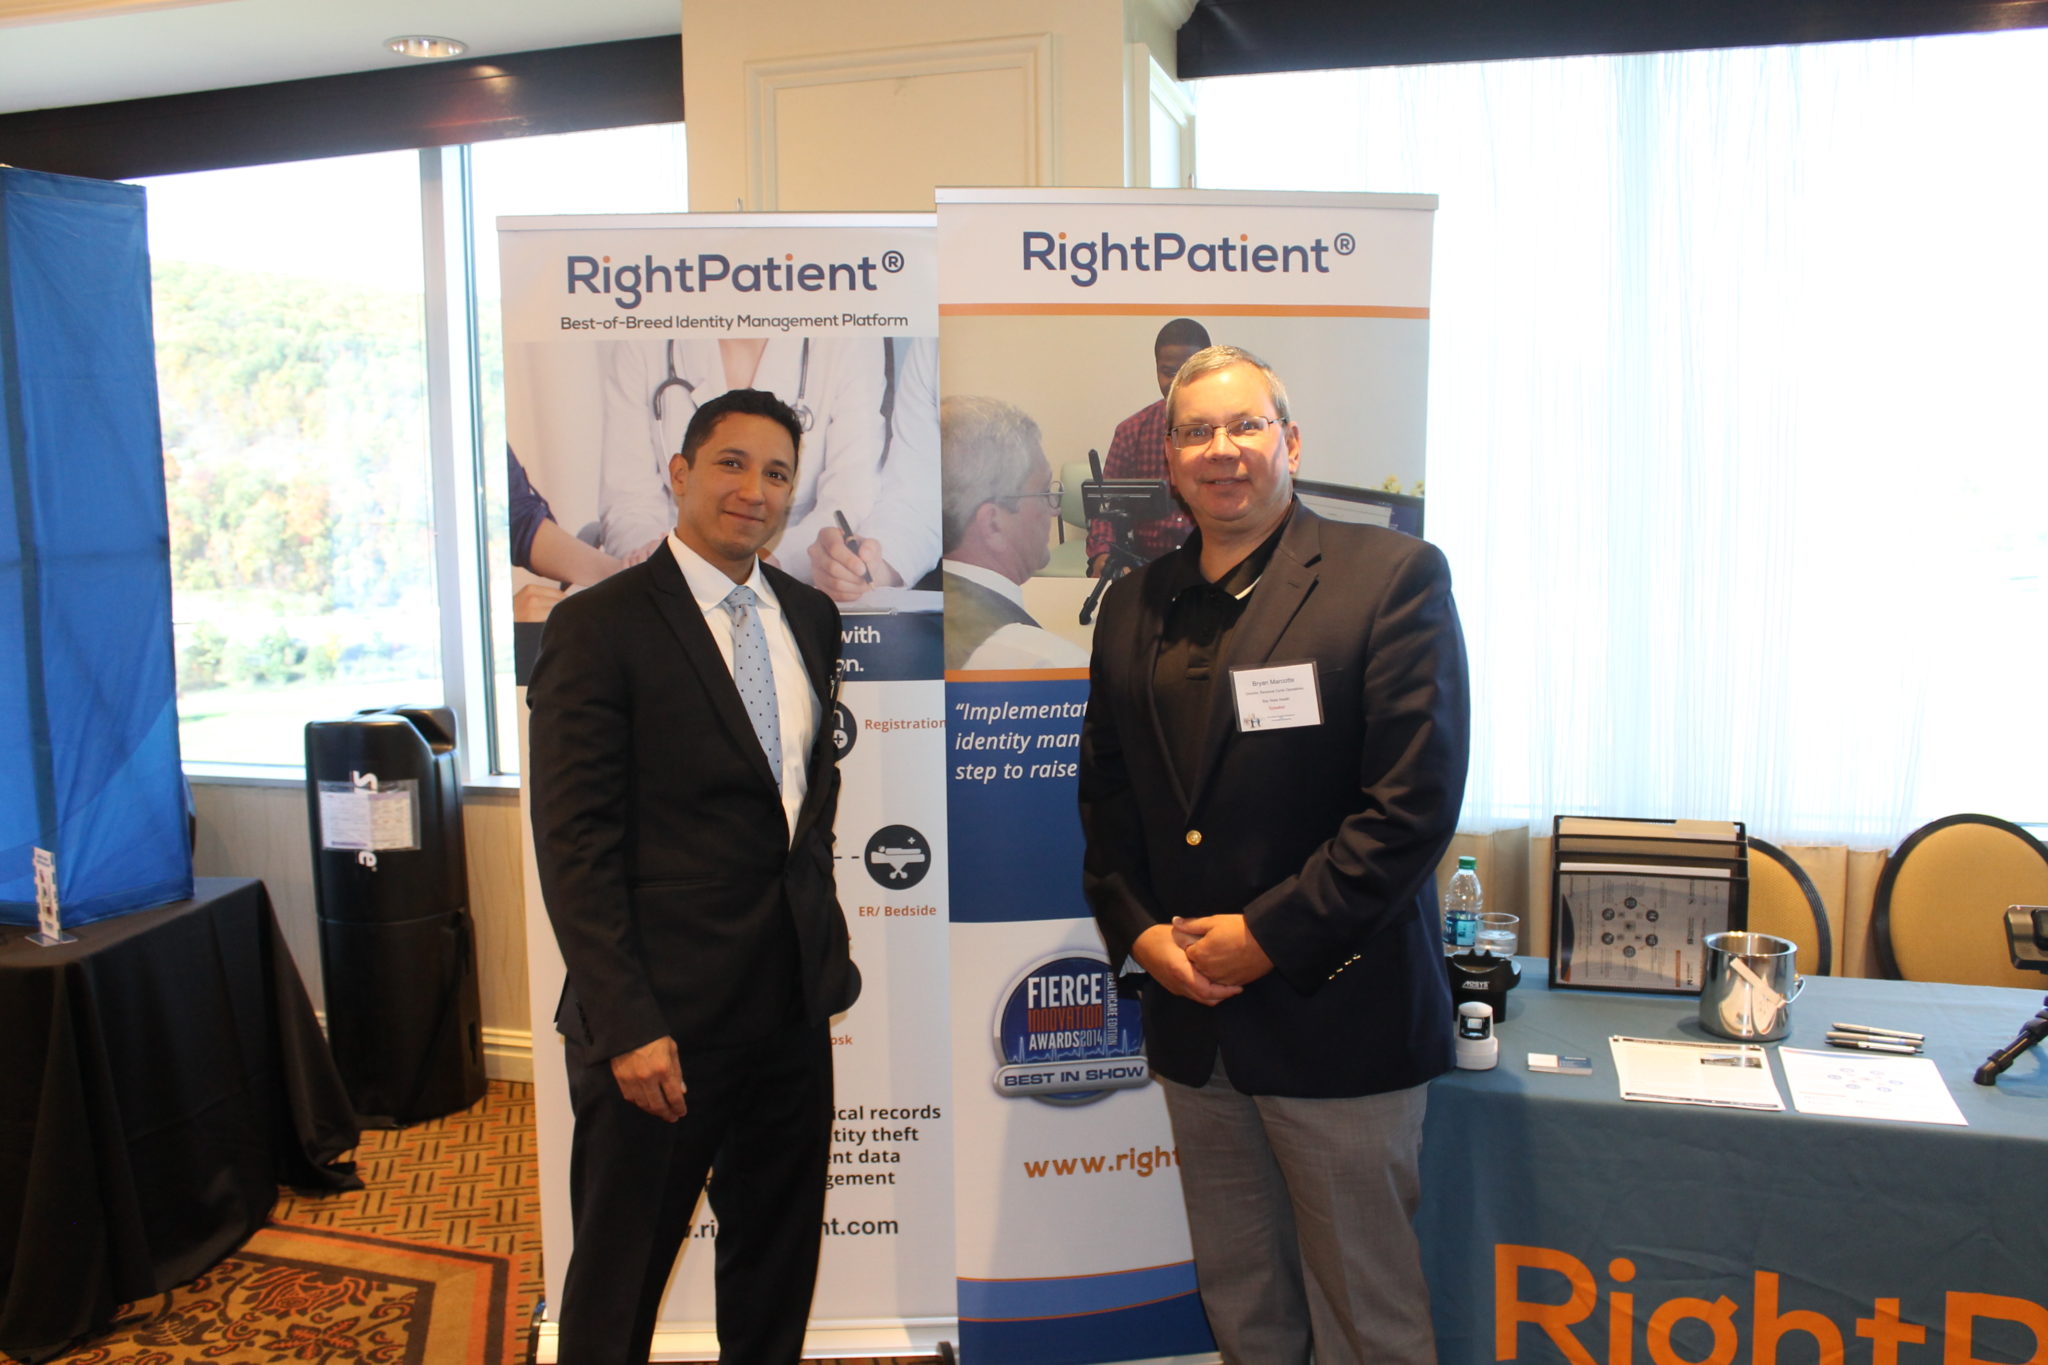 RightPatient protects patient privacy and patient safety